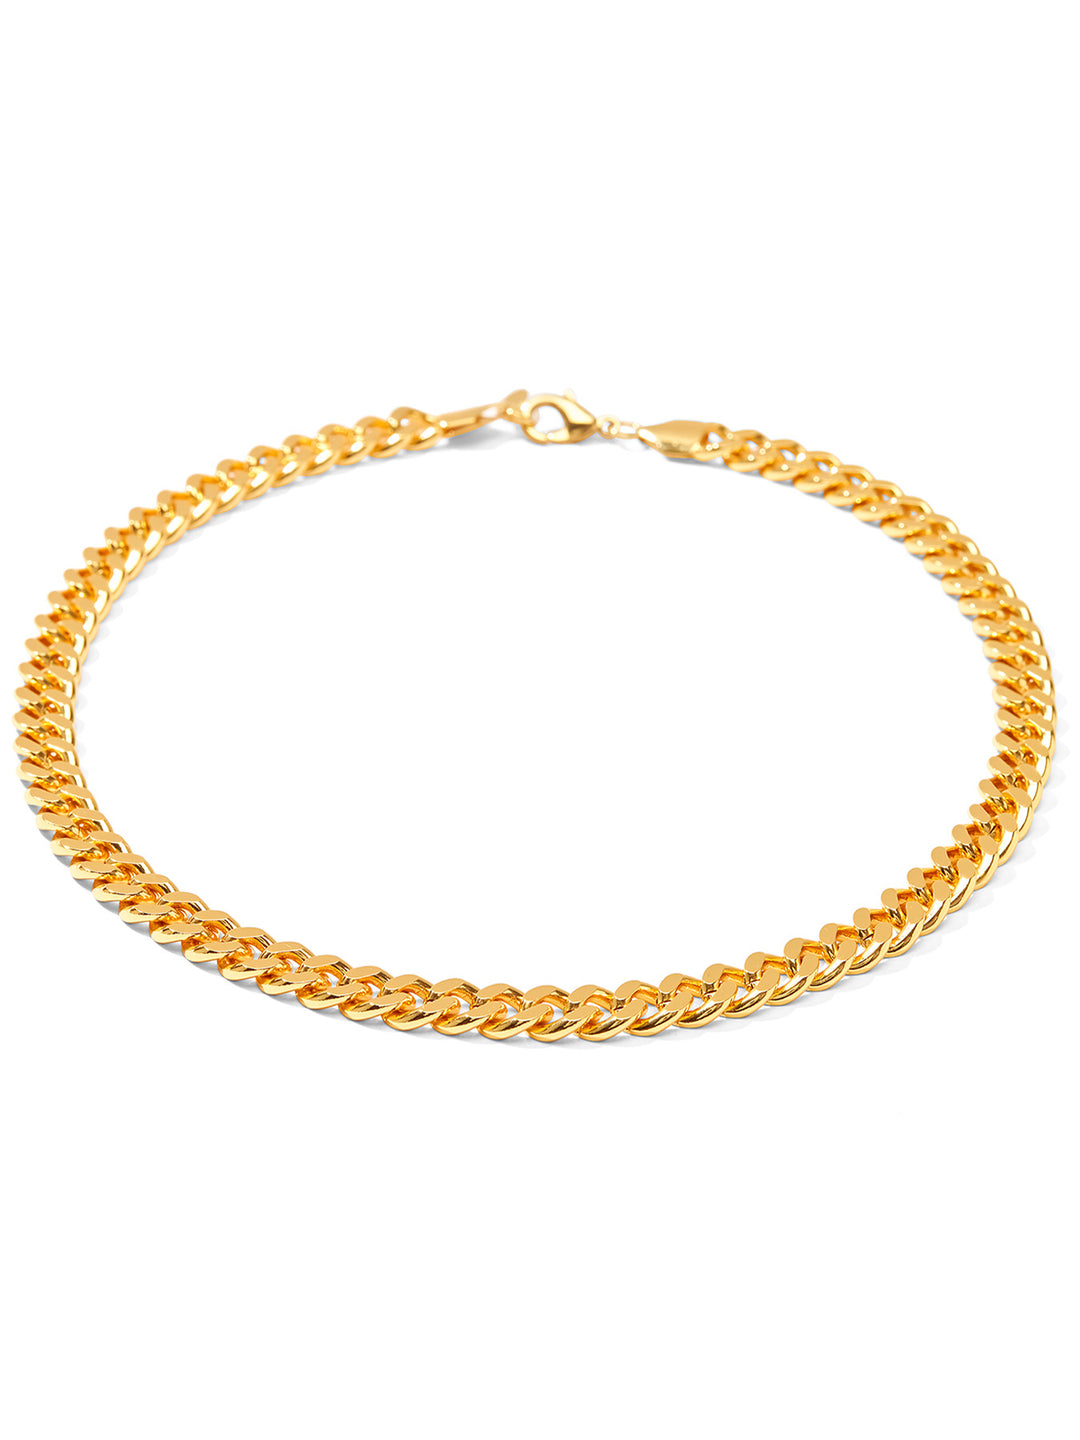 CUBAN LINK CHAIN • Color: 18K Yellow Gold